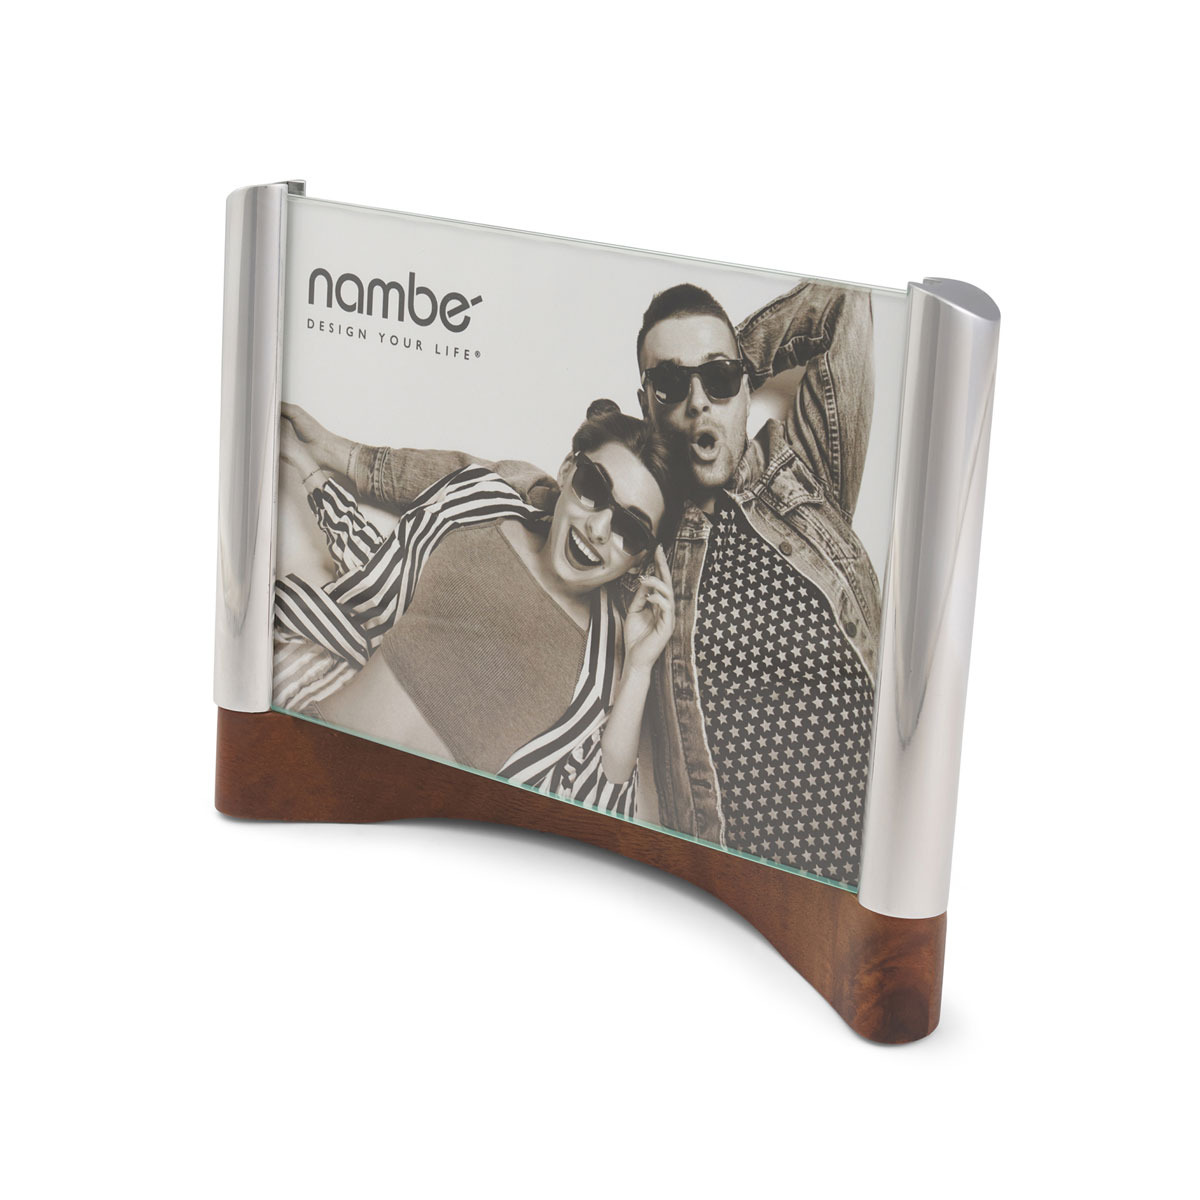 Nambe Sky View 5x7" Picture Frame